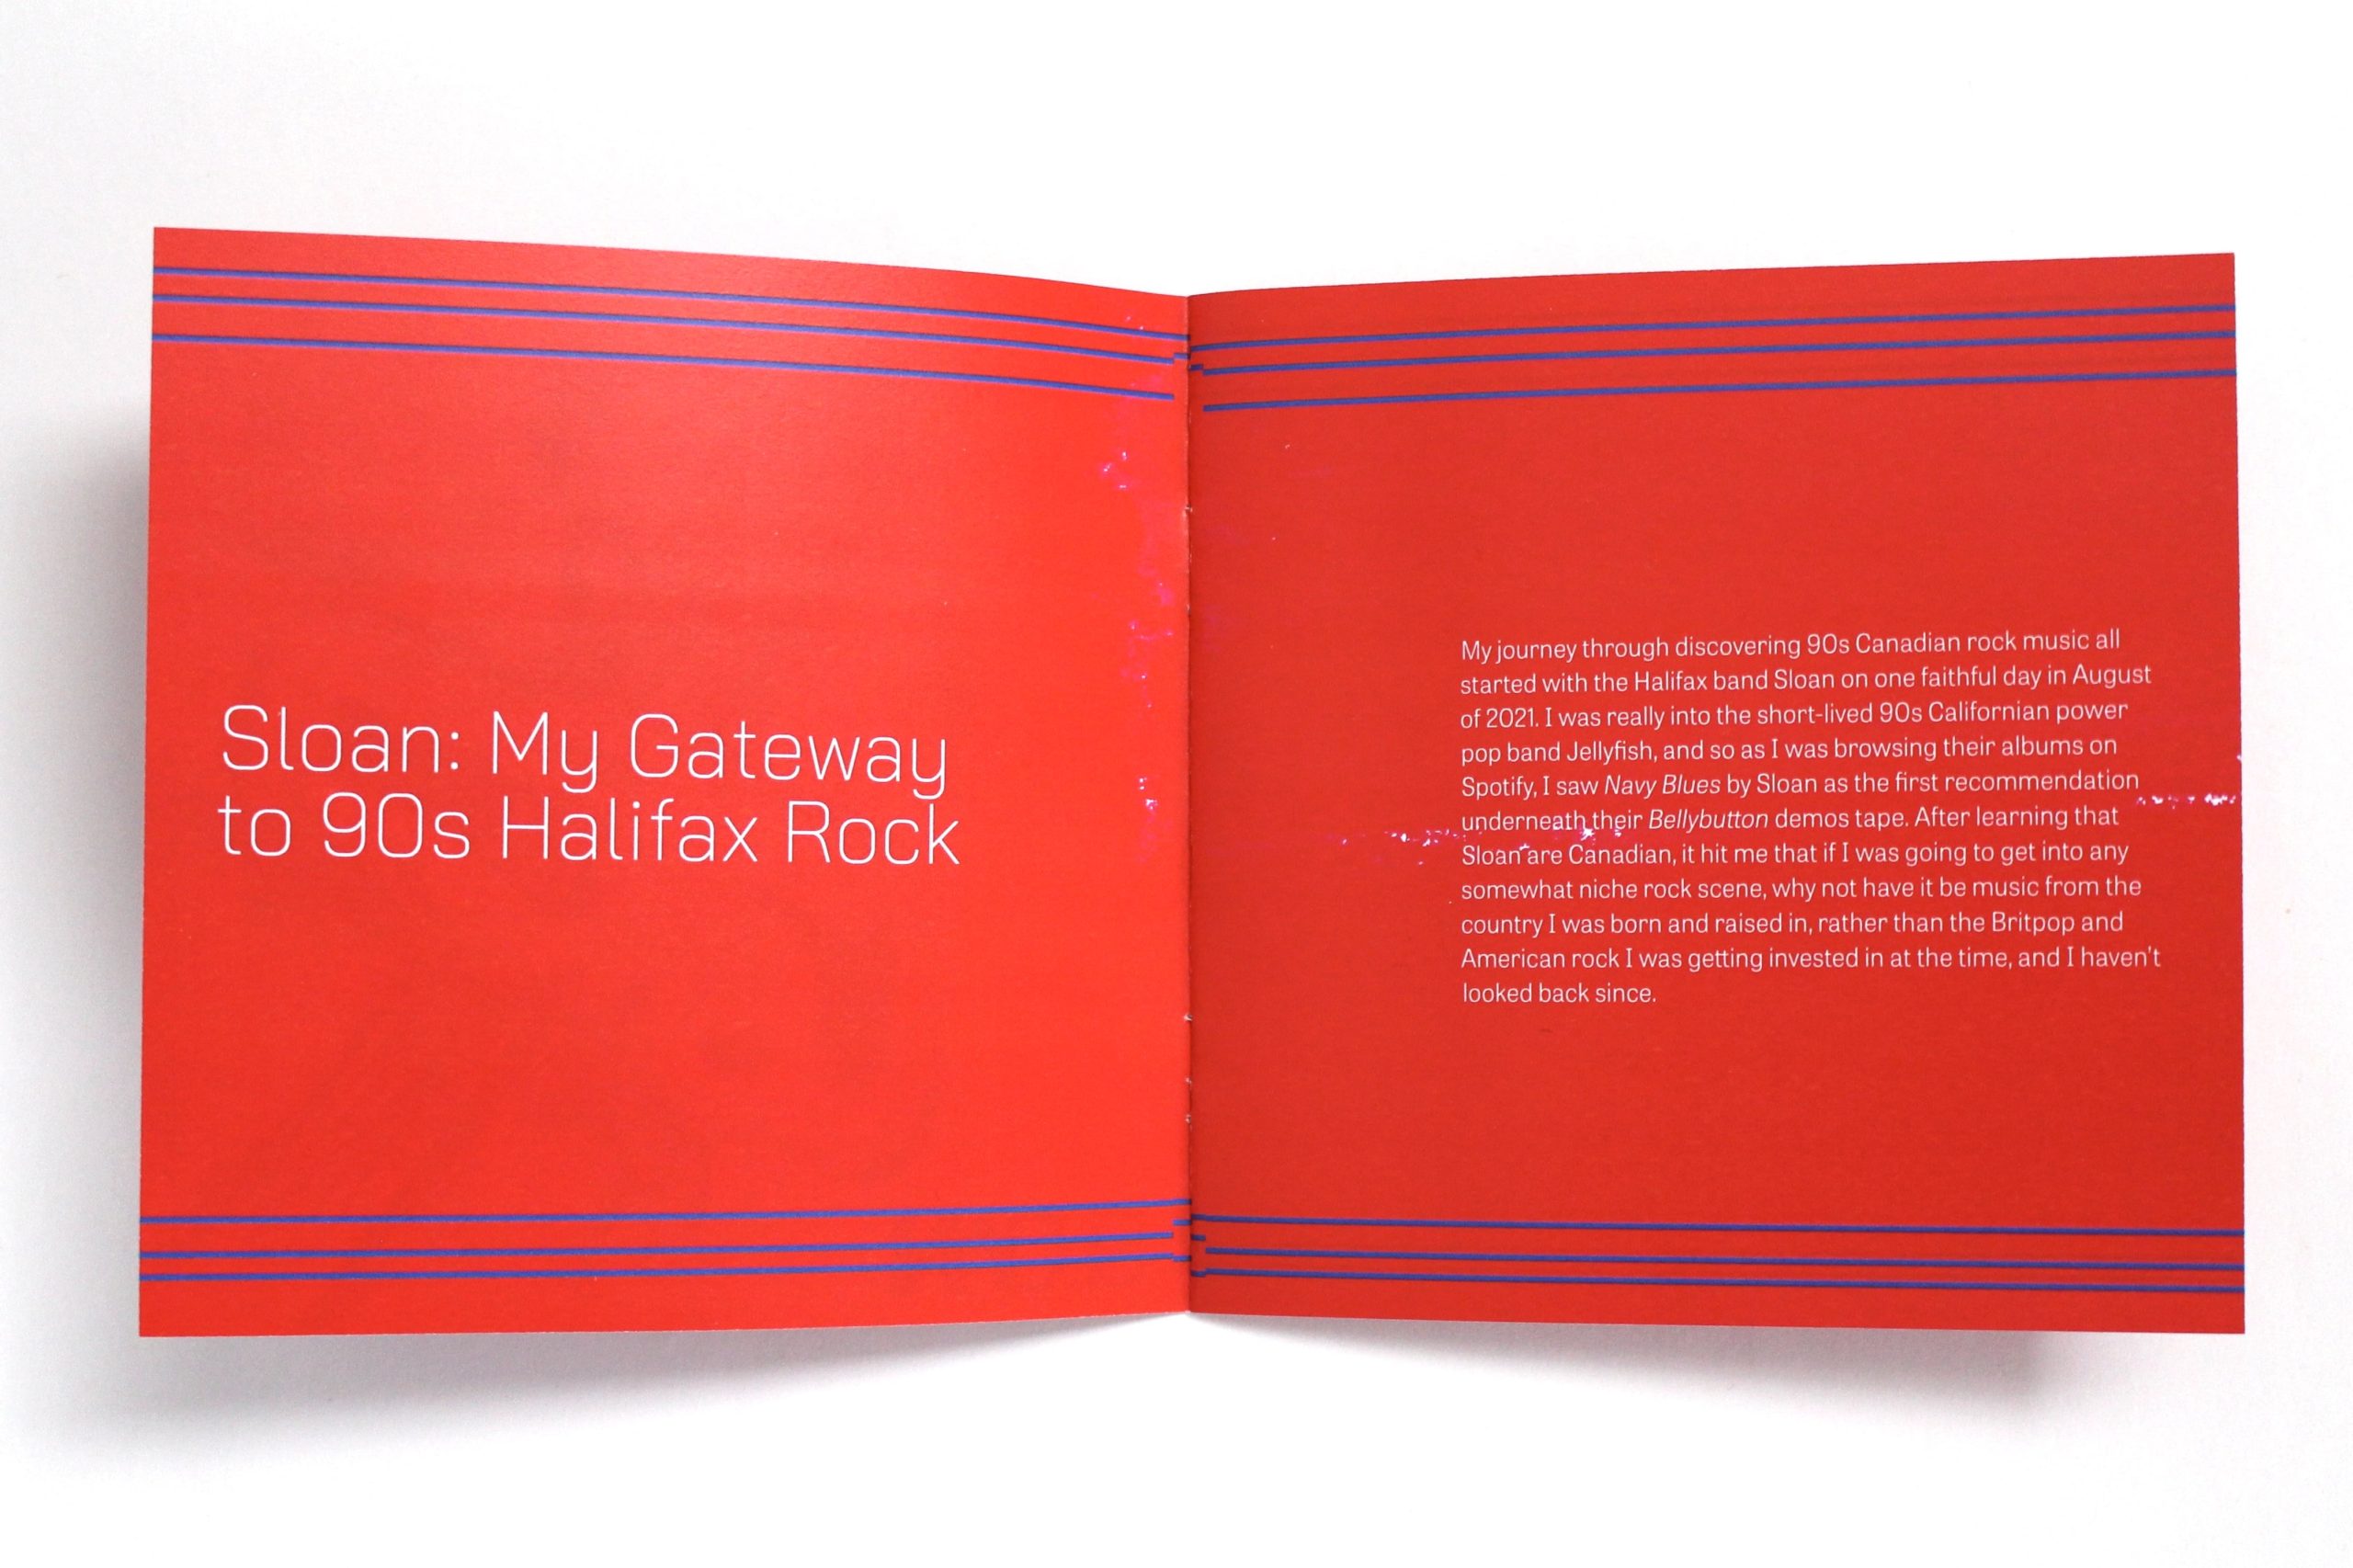 The opening pages of a CD booklet for Sloan. The pages are red with three uneven blue lines going across the top and bottom of the pages. The white text reads: "Sloan: My Gateway to 90s Halifax Rock" "My journey through discovering 90s Canadian rock music all started with the Halifax band Sloan on one faithful day in August of 2021. I was really into the short-lived 90s Californian power pop band Jellyfish, and so as I was browsing their albums on Spotify, I saw Navy Blues by Sloan as the first recommendation underneath their Bellybutton demos tape. After learning that Sloan are Canadian, it hit me that if I was going to get into any somewhat niche rock scene, why not have it be music from the country I was born and raised in, rather than the Britpop and American rock I was getting invested in at the time, and I haven’t looked back since."